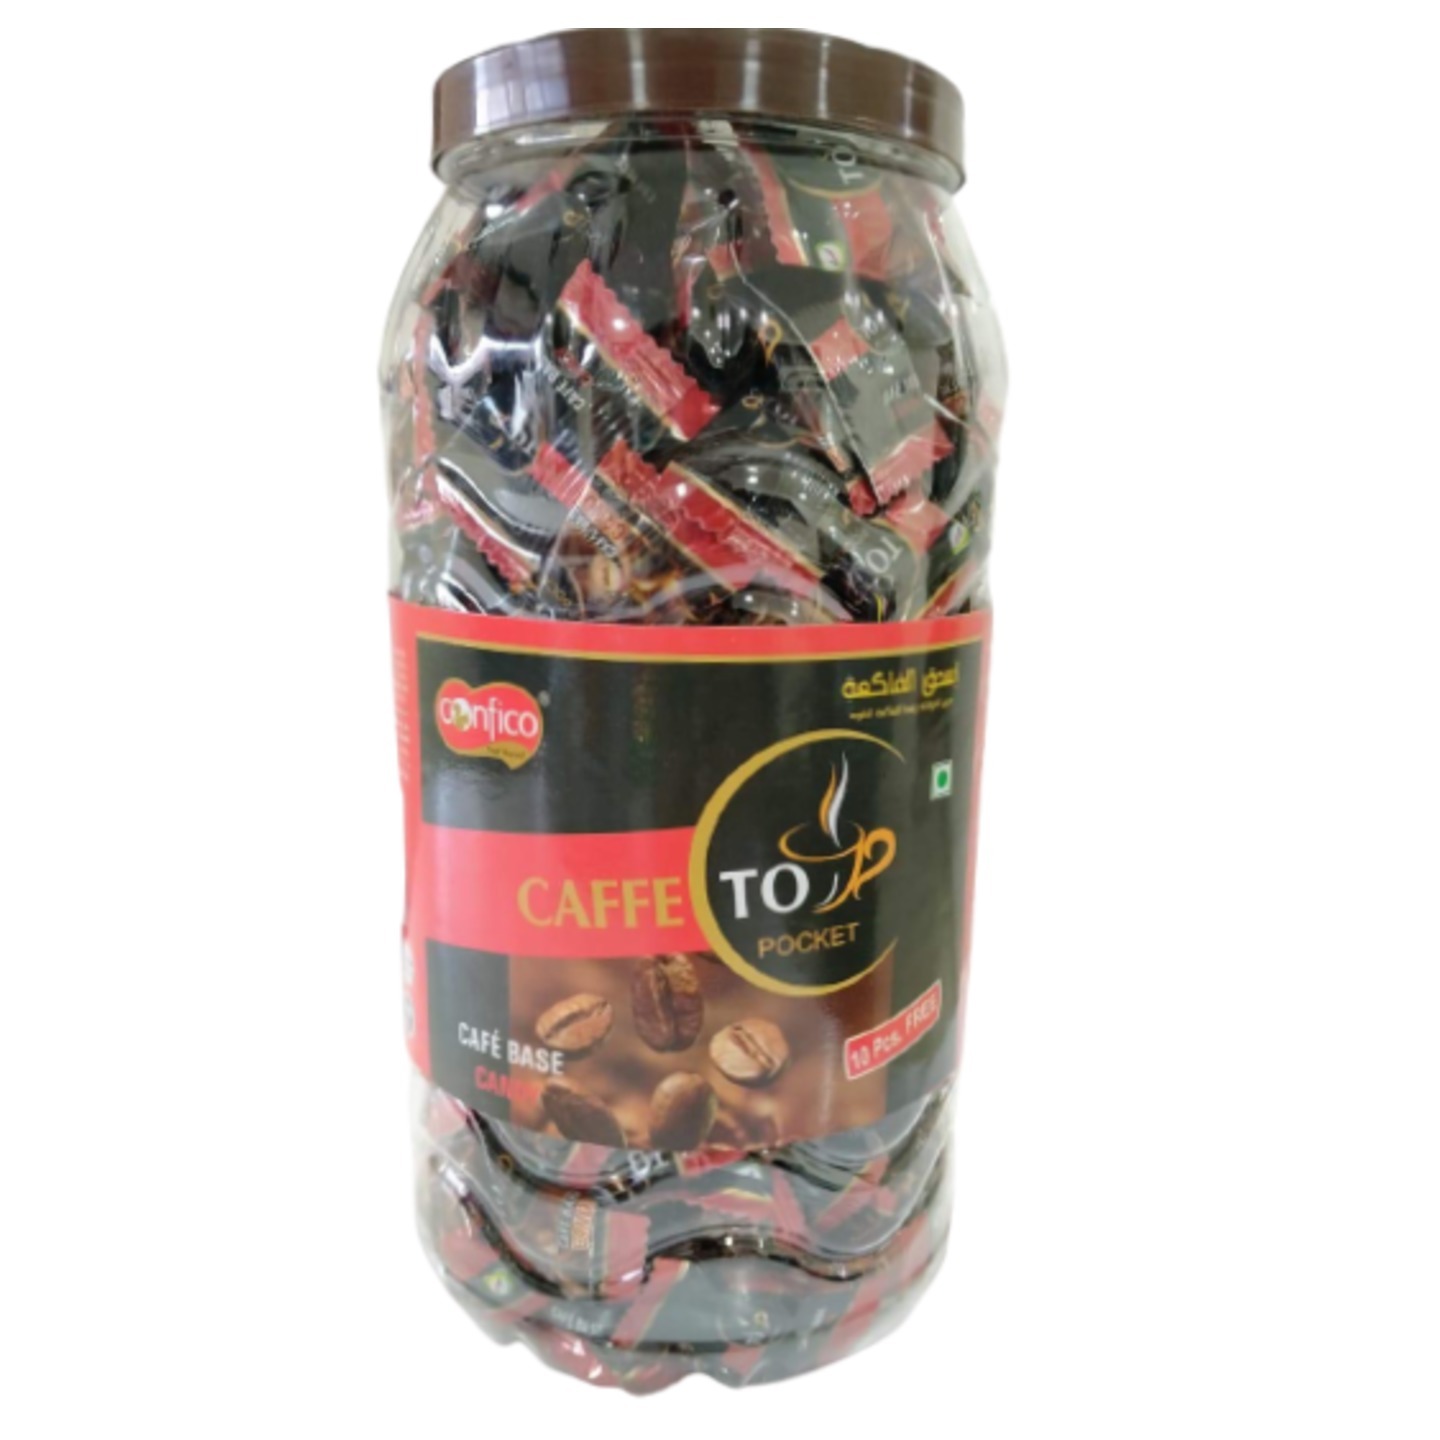 Confico Cappuccino Coffee Flavoured Candy Jar Mrp 220